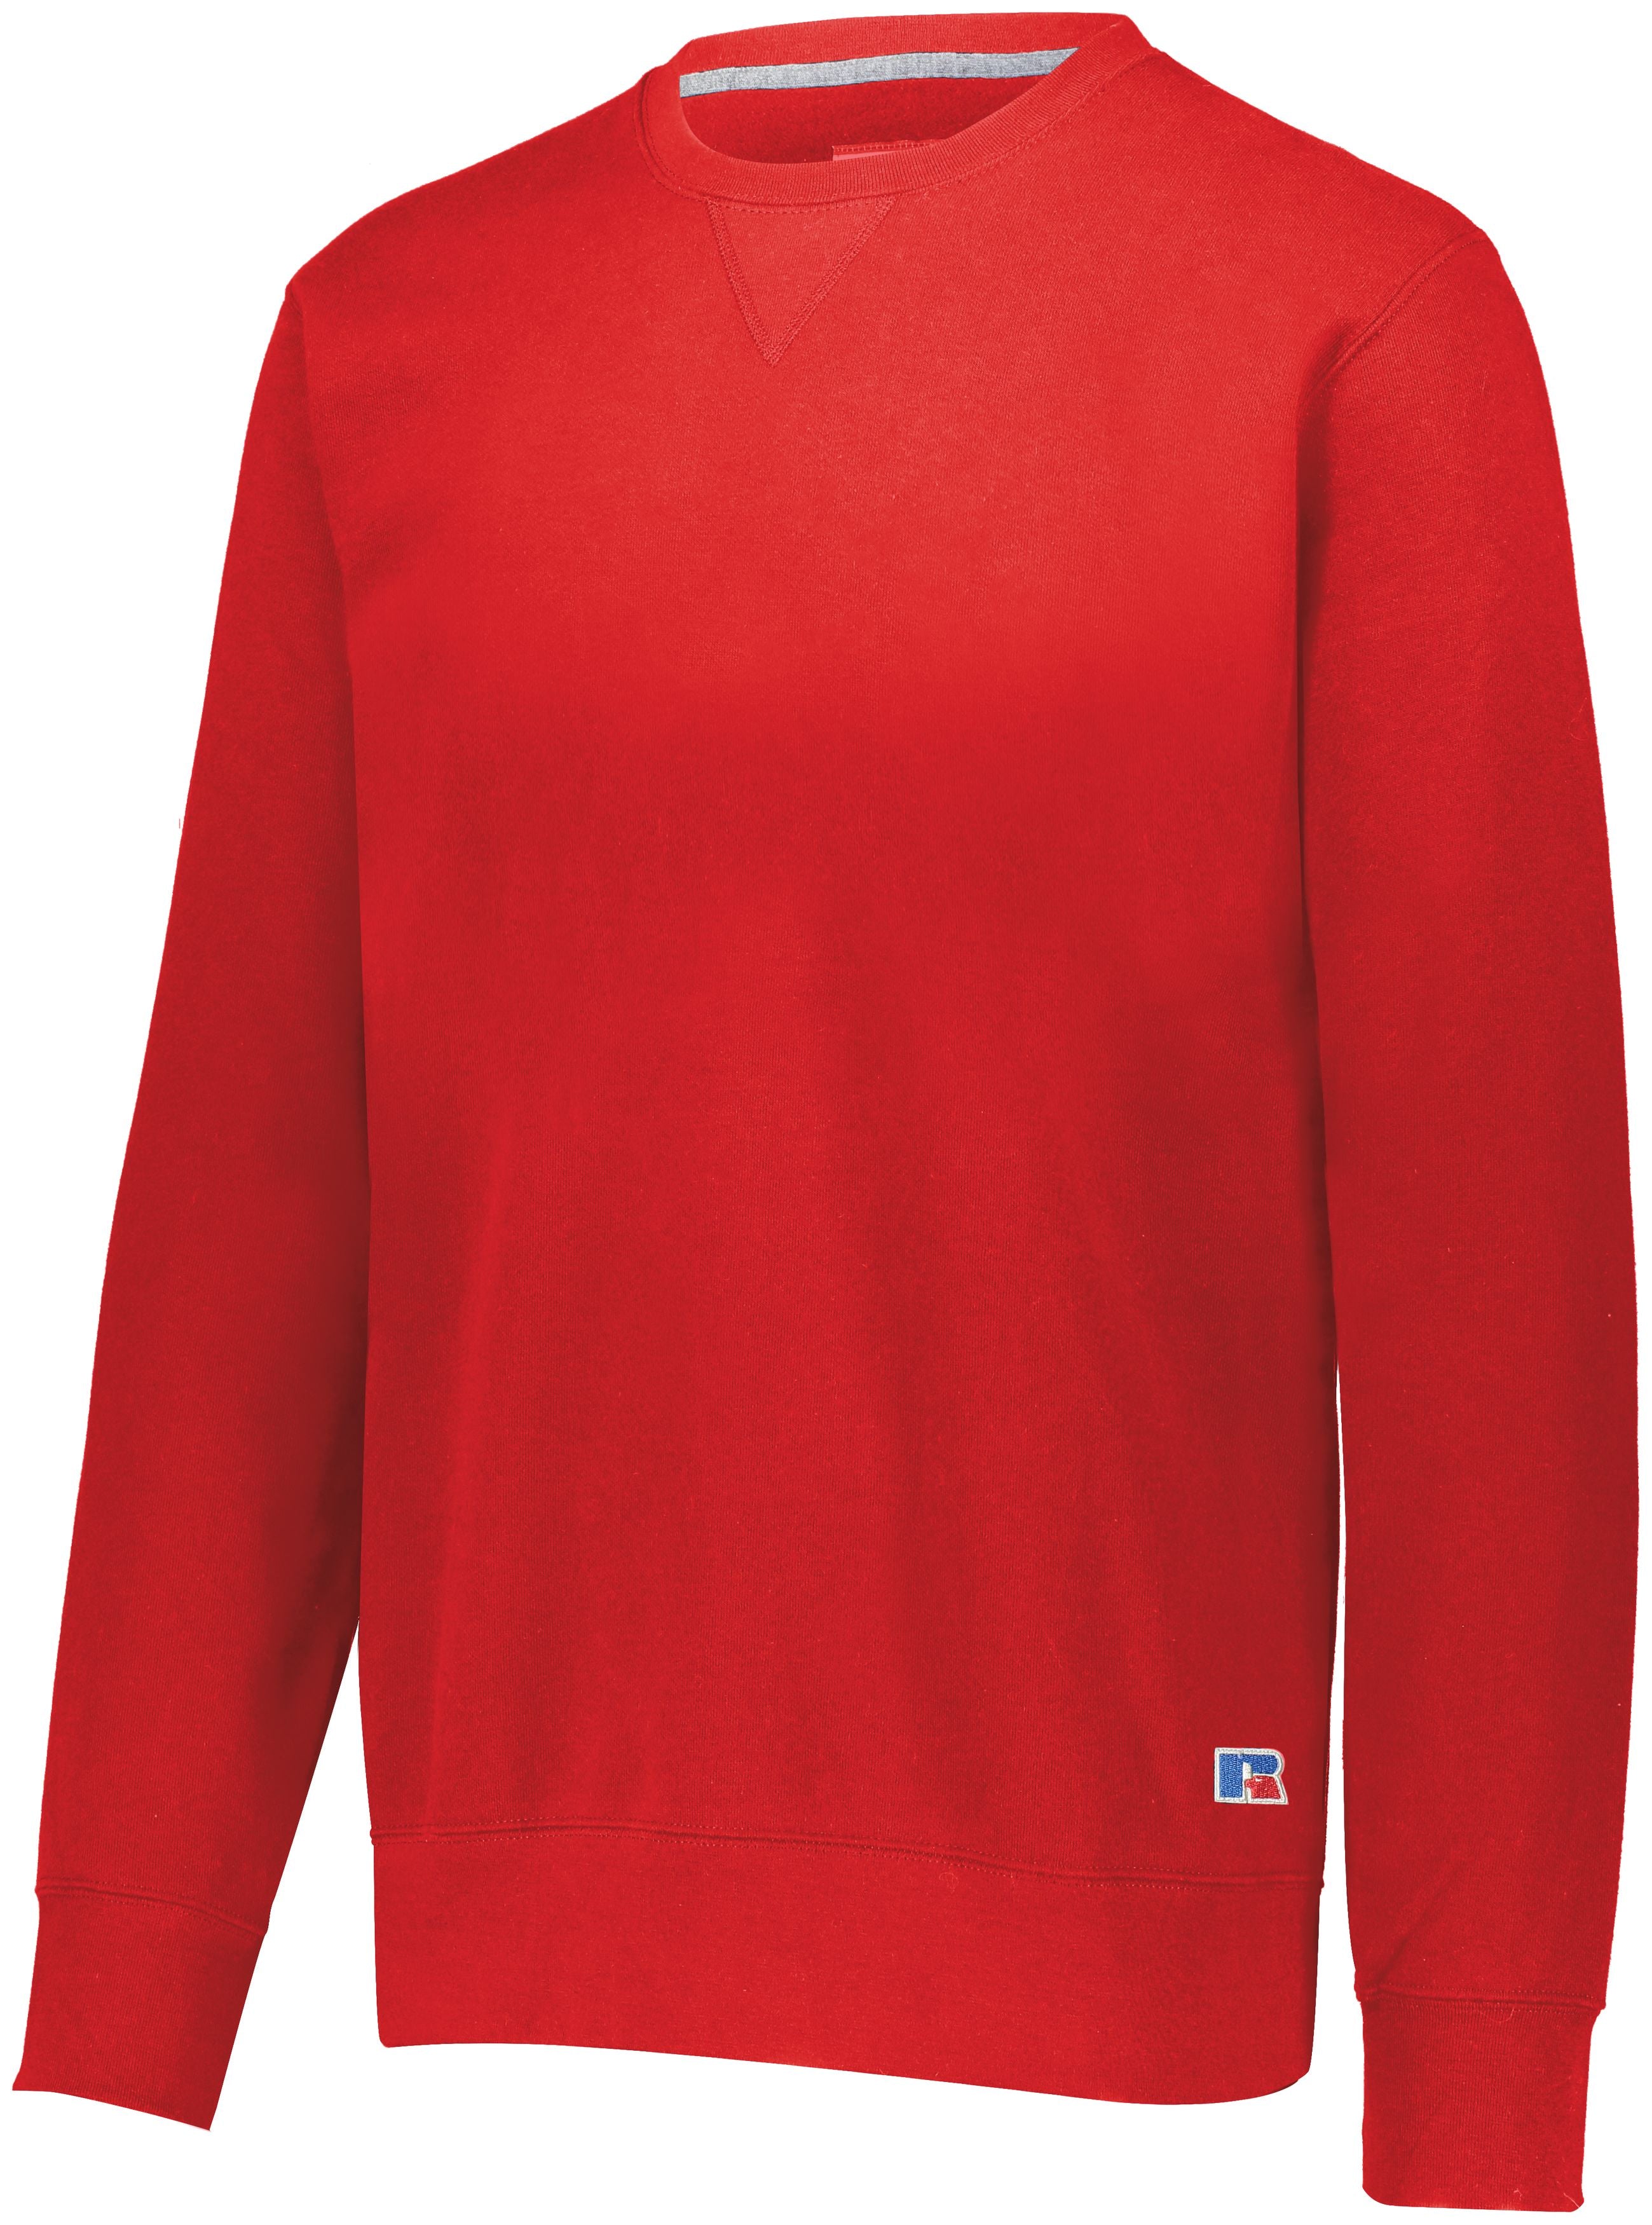 Russell Athletic 80/20 Fleece Crew in True Red  -Part of the Adult, Russell-Athletic-Products product lines at KanaleyCreations.com